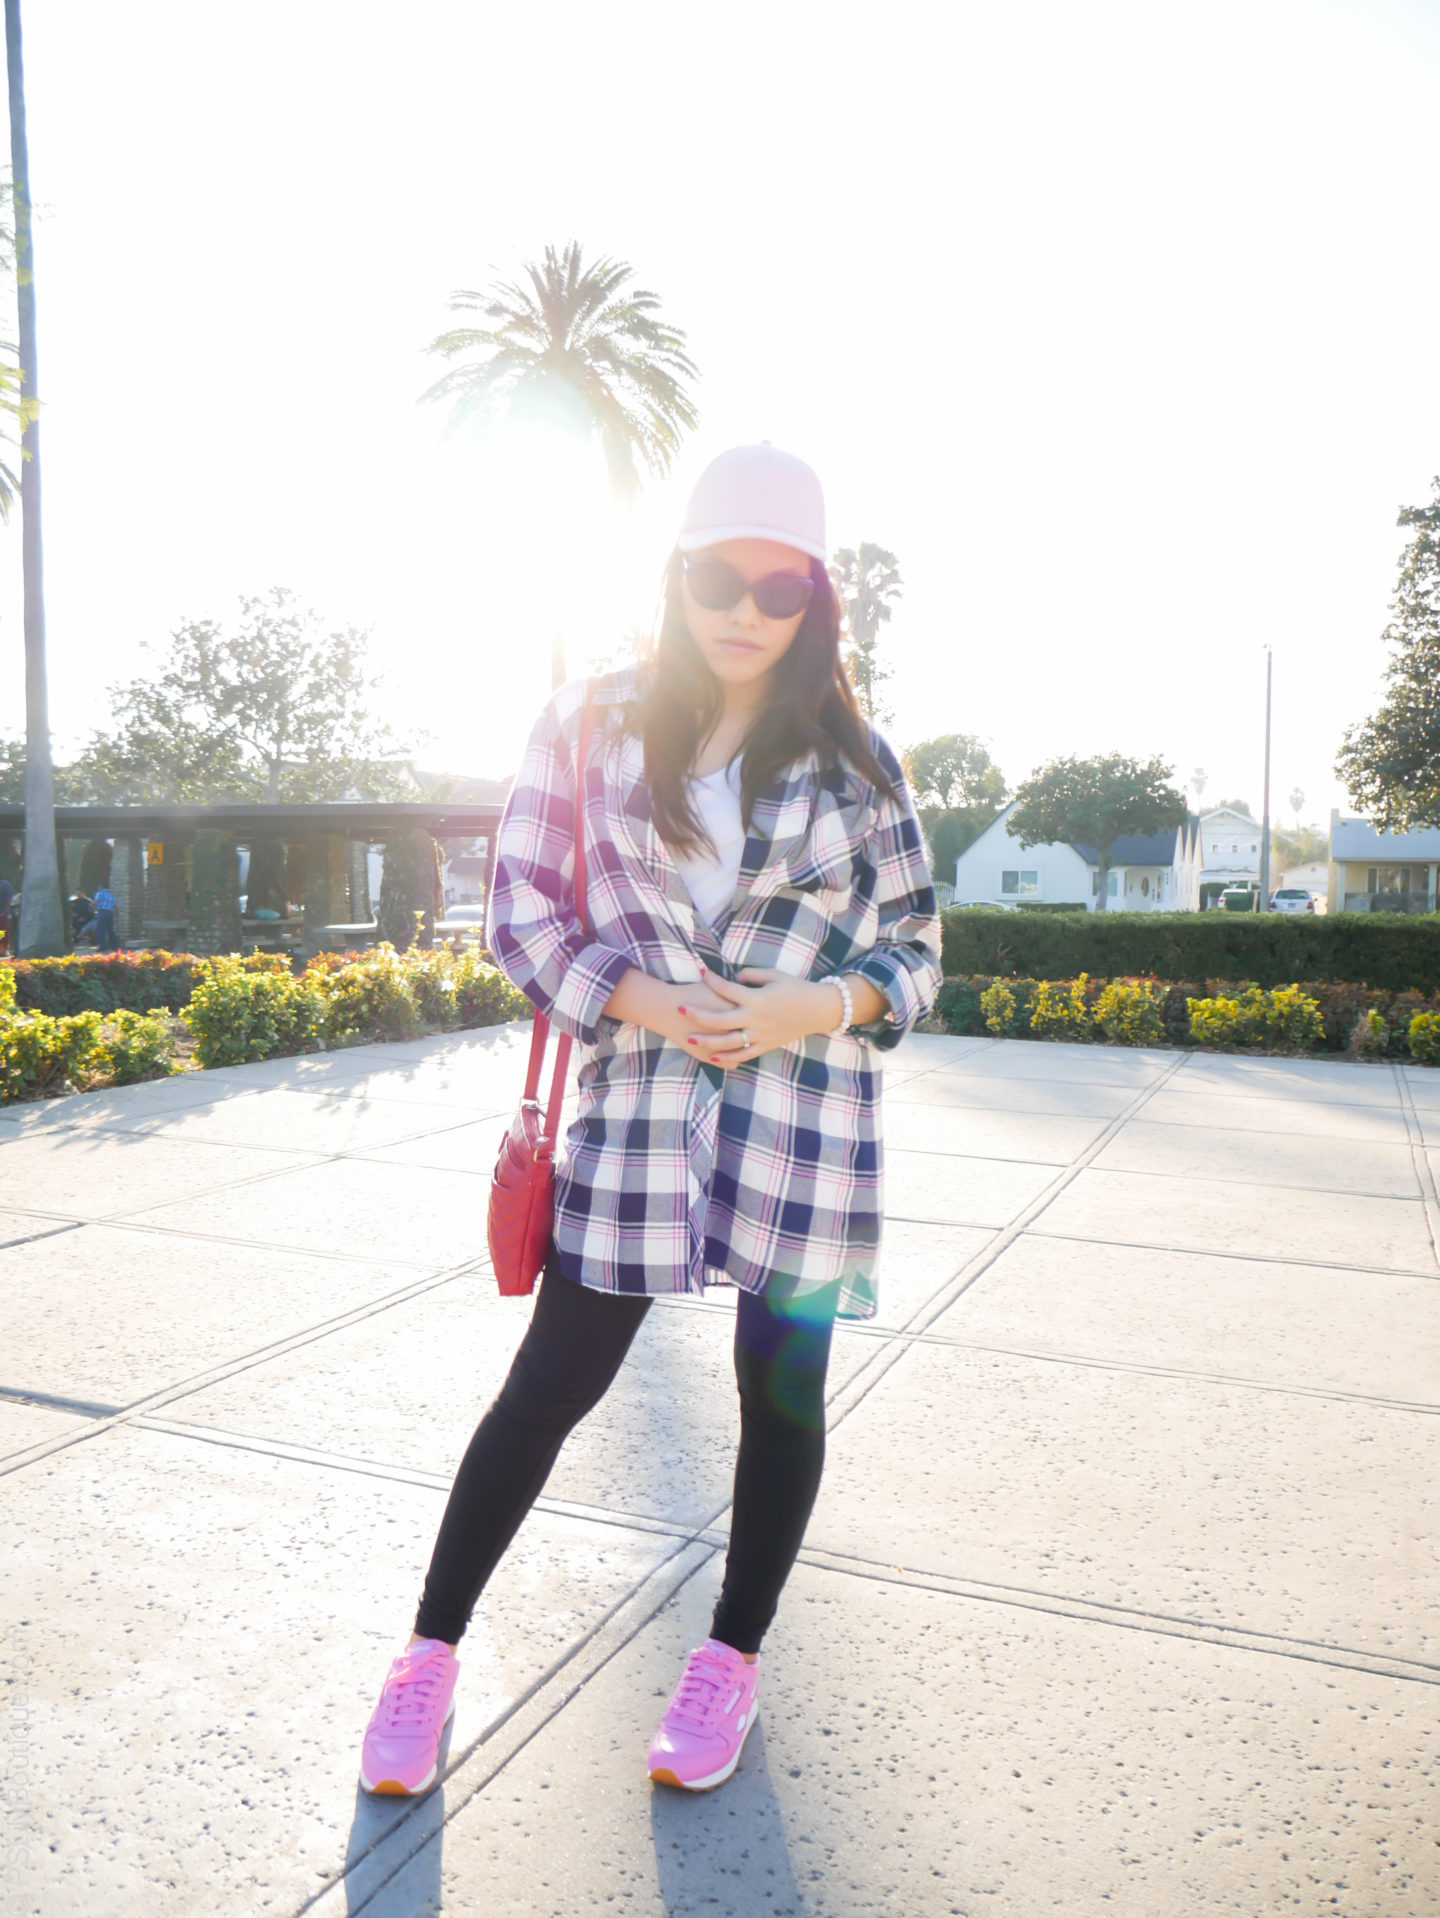 Instagram: @pslilyboutique, Pinterest, Los Angeles fashion blogger, top fashion blog, best fashion blog, fashion & personal style blog, travel blog, LA fashion blogger, Gone Plaid... | PSLily Boutique, winter 2018 outfit ideas, my style, KUT from the Kloth Nordstrom blue and white pink plaid shirt, pink H&M hat, pink leather Reebok classic sneakers shoes, park, palm trees, red small quilted crossbody bag